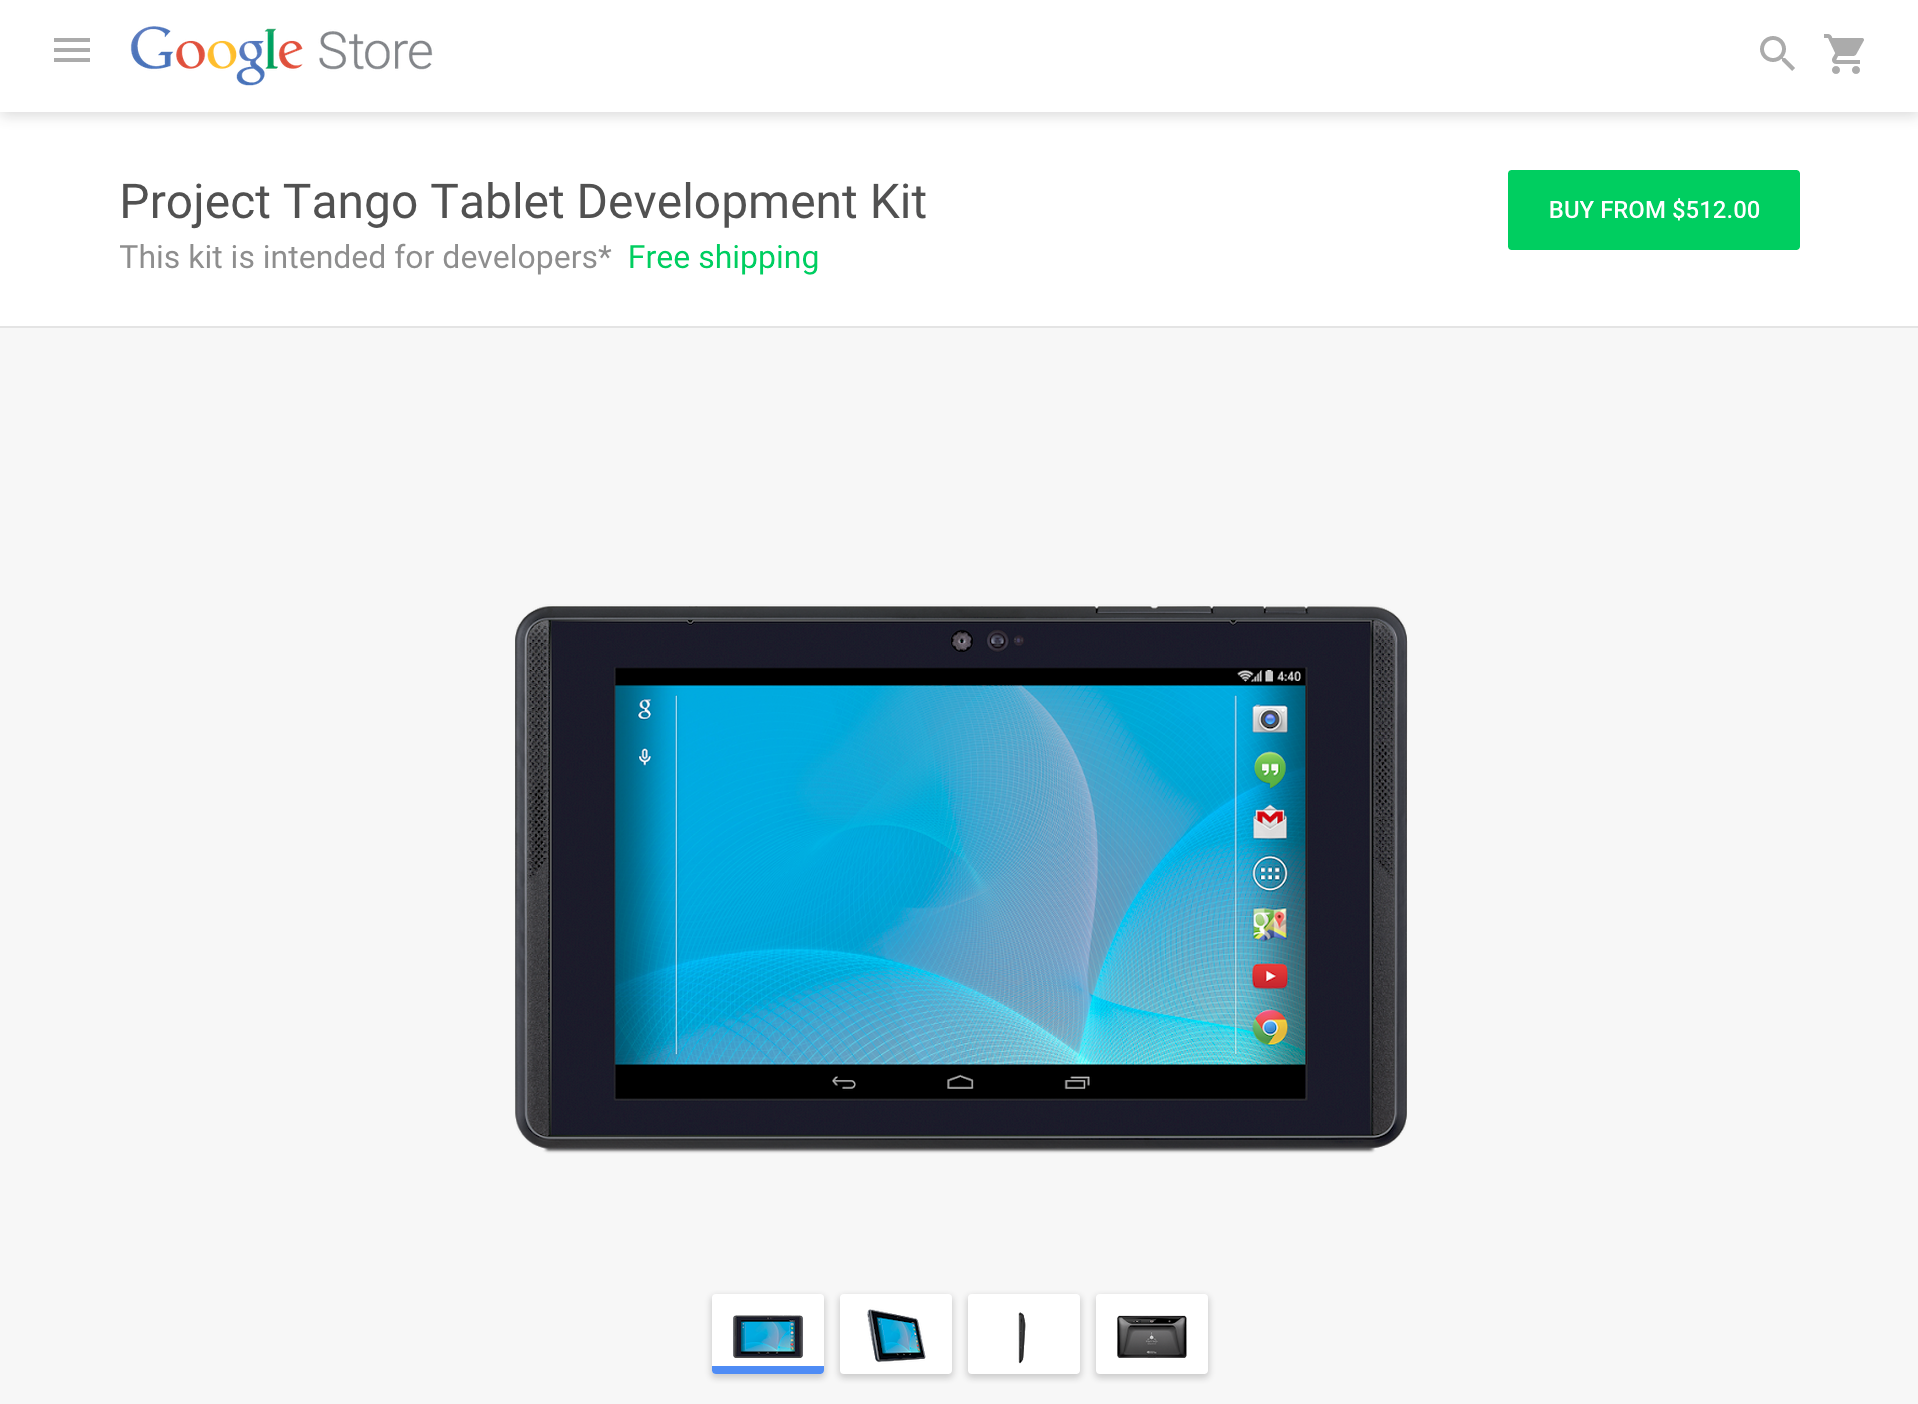 Google slashes price of Project Tango Tablet to US$512 – Now available without invitation